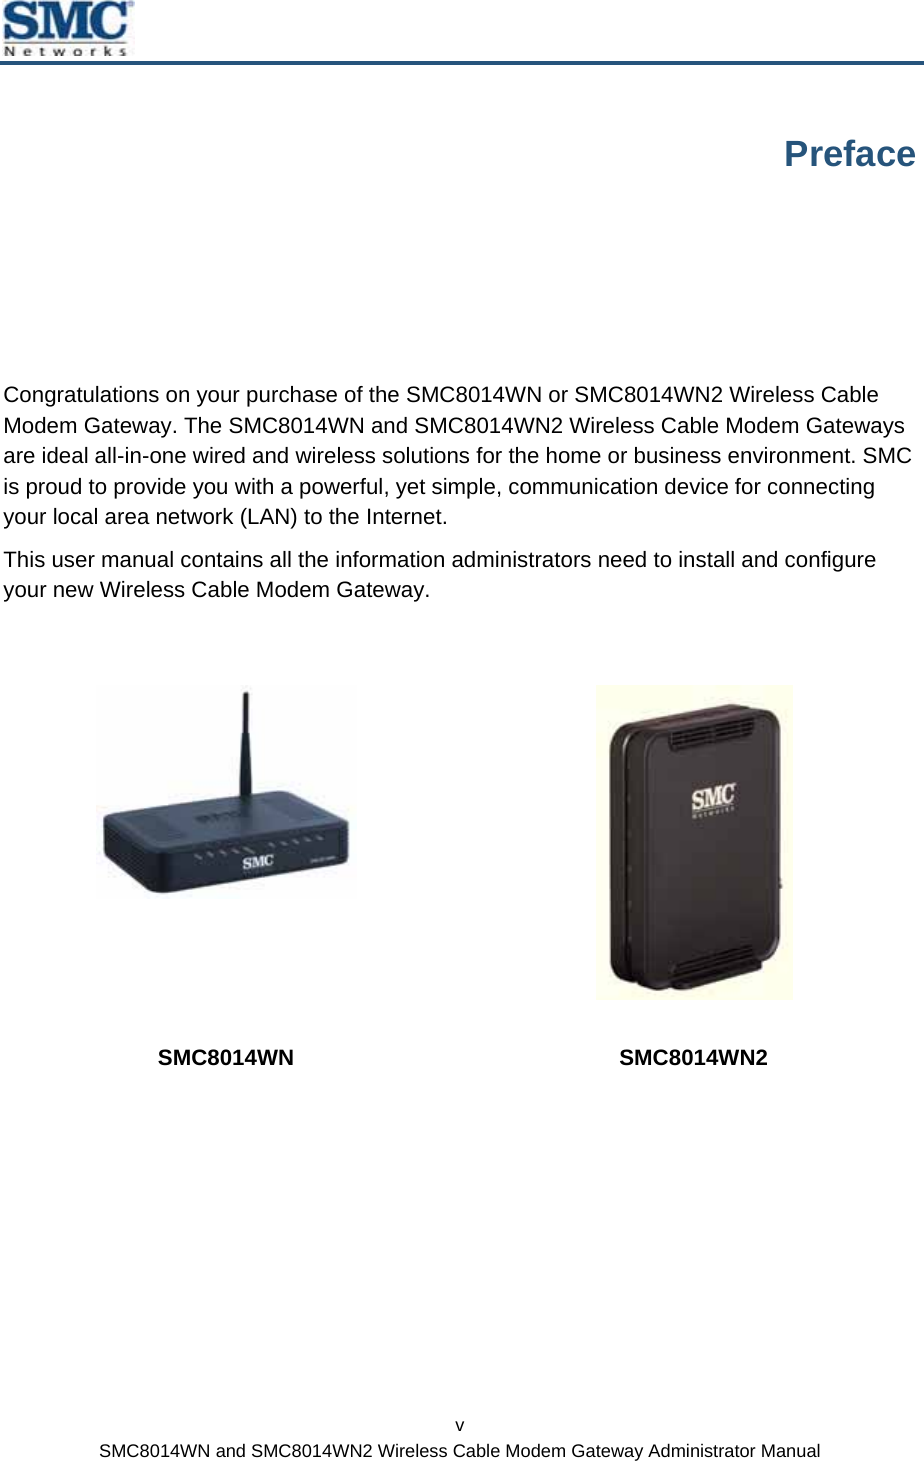  v SMC8014WN and SMC8014WN2 Wireless Cable Modem Gateway Administrator Manual Preface Congratulations on your purchase of the SMC8014WN or SMC8014WN2 Wireless Cable Modem Gateway. The SMC8014WN and SMC8014WN2 Wireless Cable Modem Gateways are ideal all-in-one wired and wireless solutions for the home or business environment. SMC is proud to provide you with a powerful, yet simple, communication device for connecting your local area network (LAN) to the Internet. This user manual contains all the information administrators need to install and configure your new Wireless Cable Modem Gateway.    SMC8014WN SMC8014WN2  